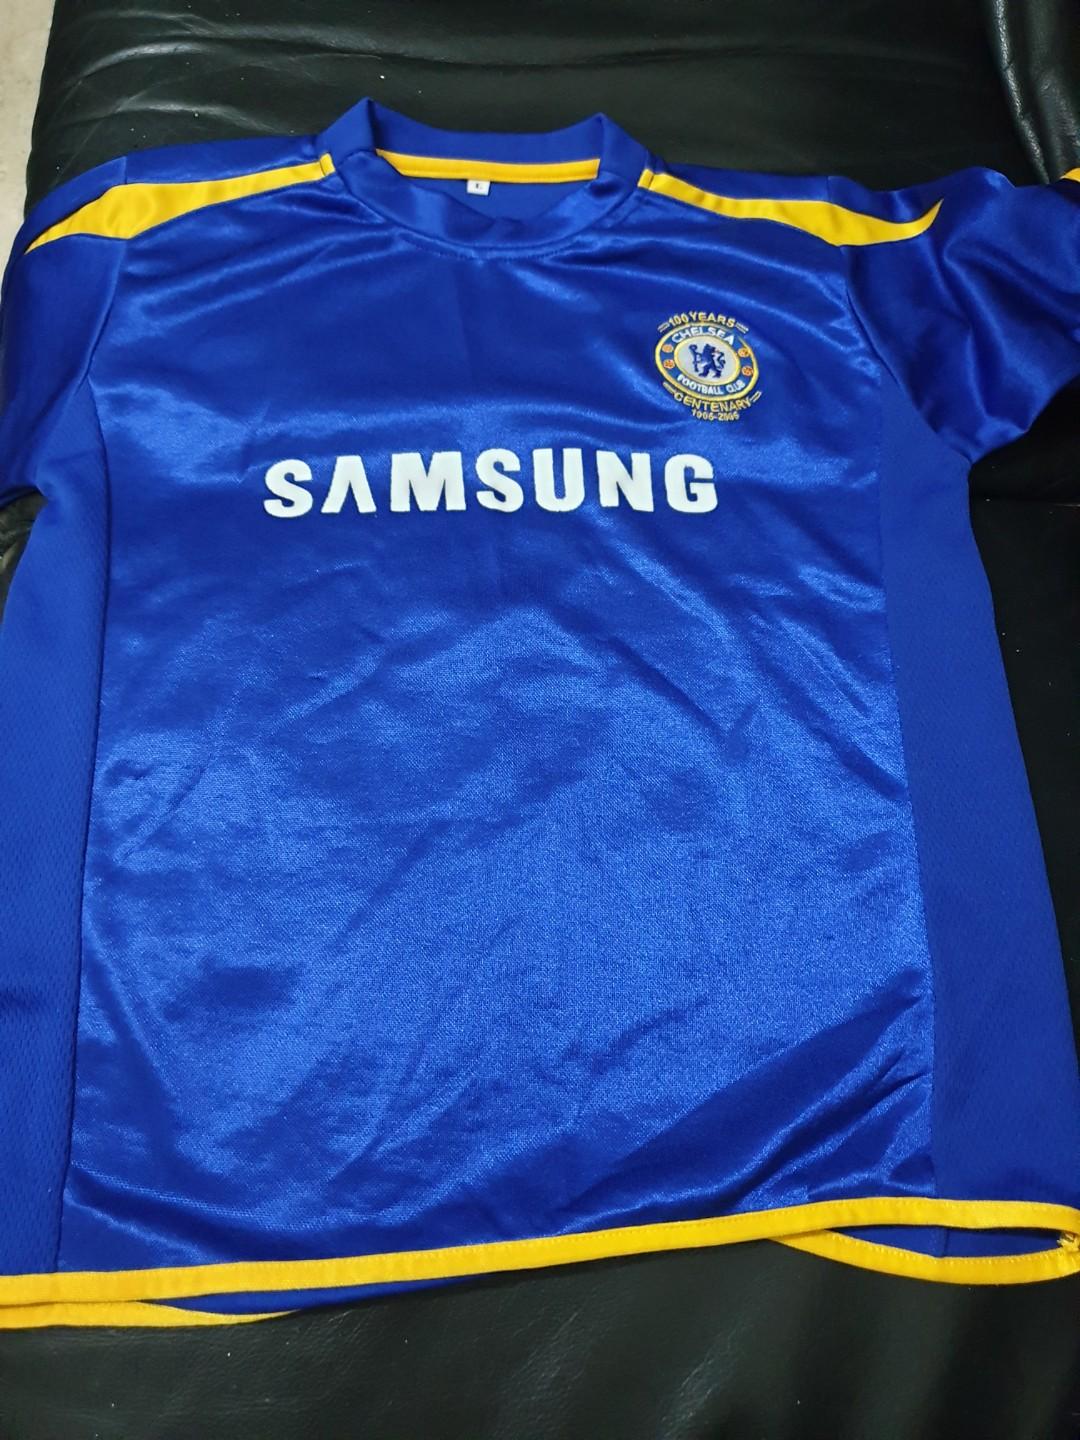 chelsea limited edition jersey